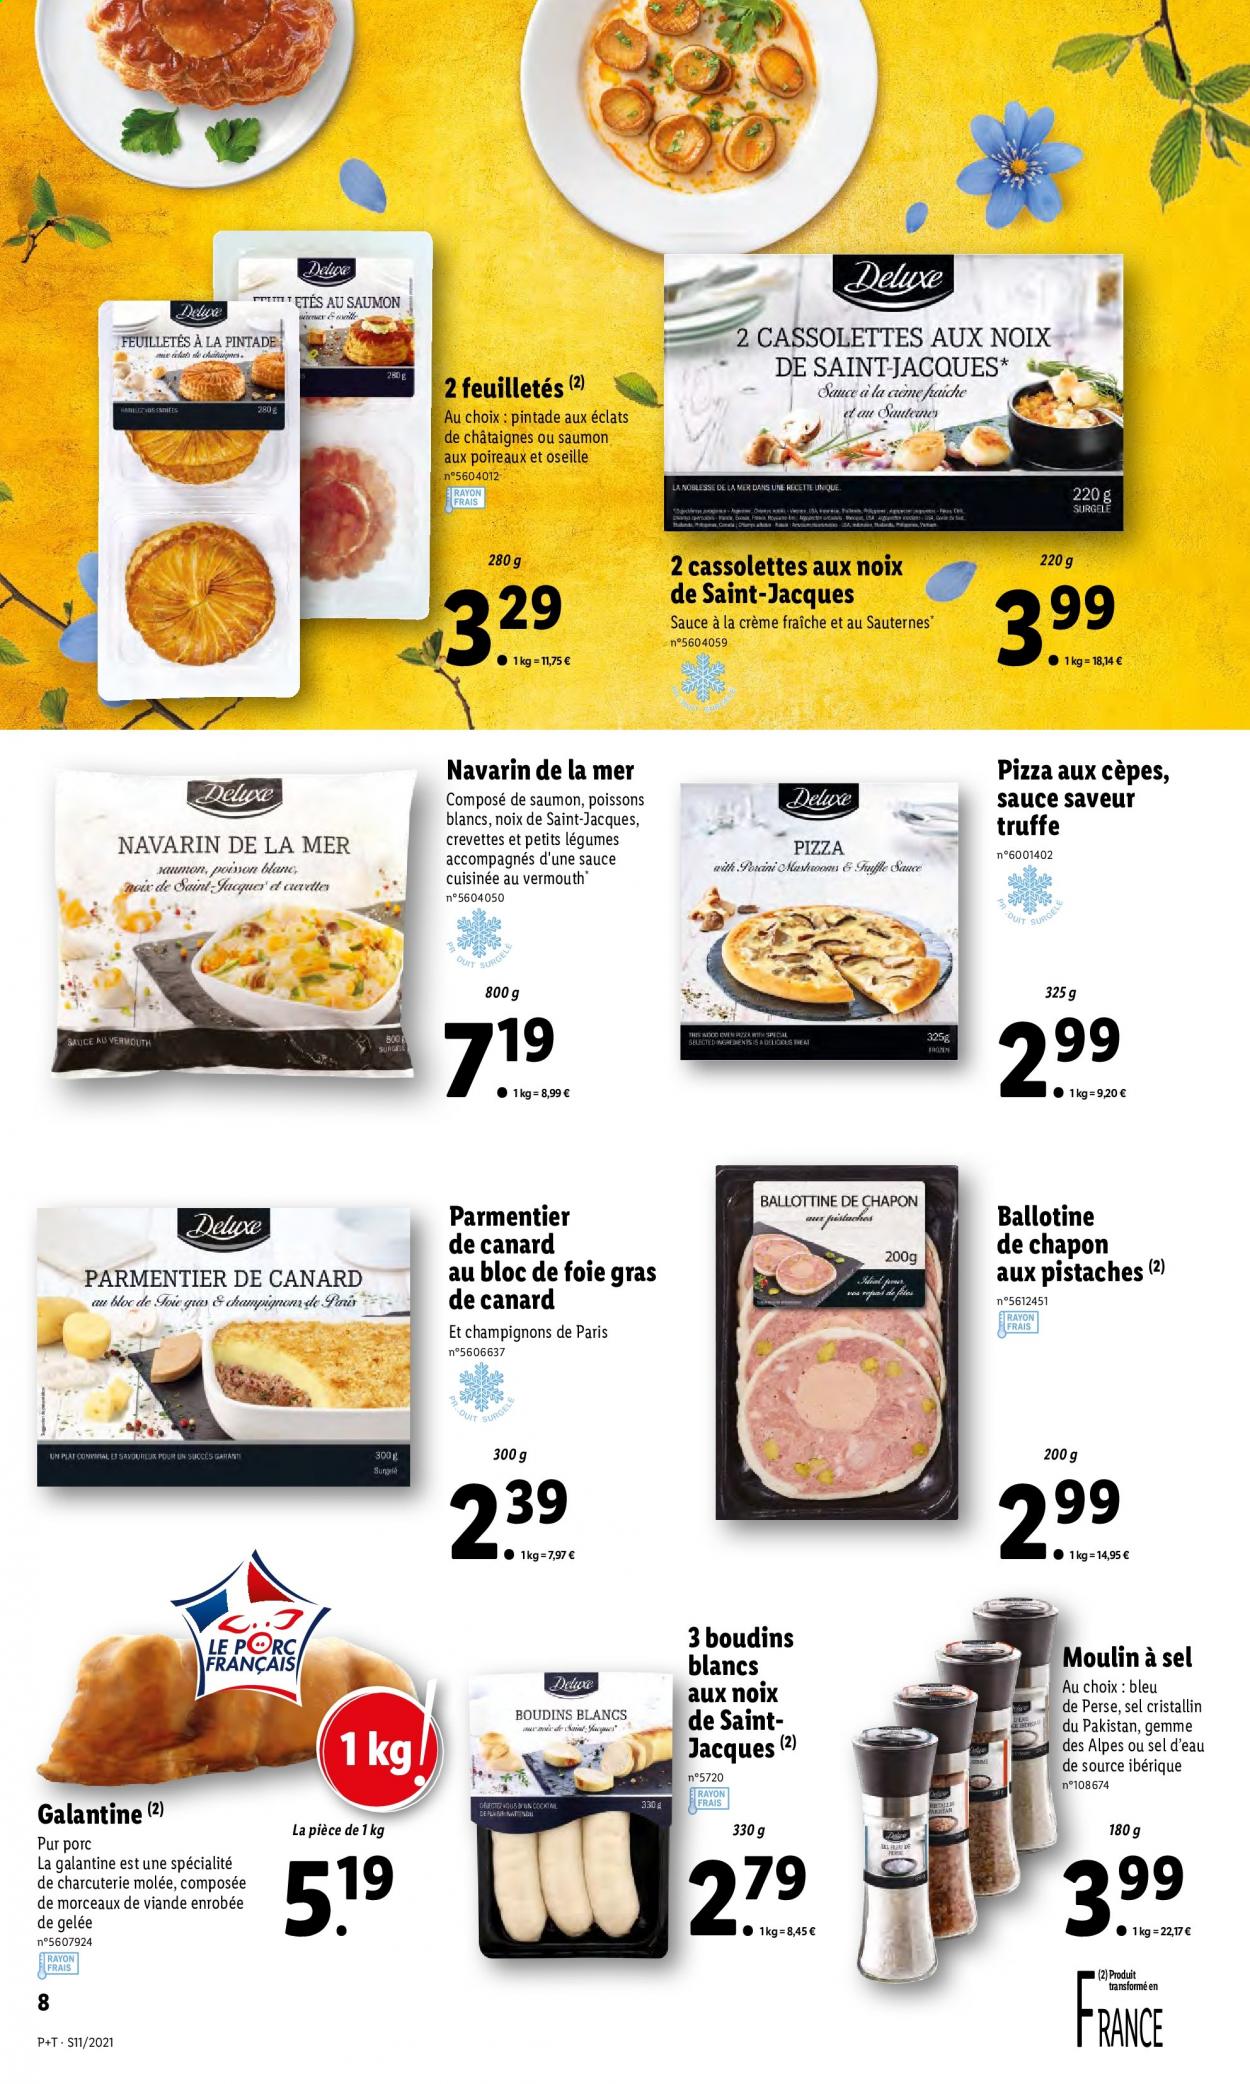 Catalogue Lidl - 17.03.2021 - 23.03.2021. Page 8.